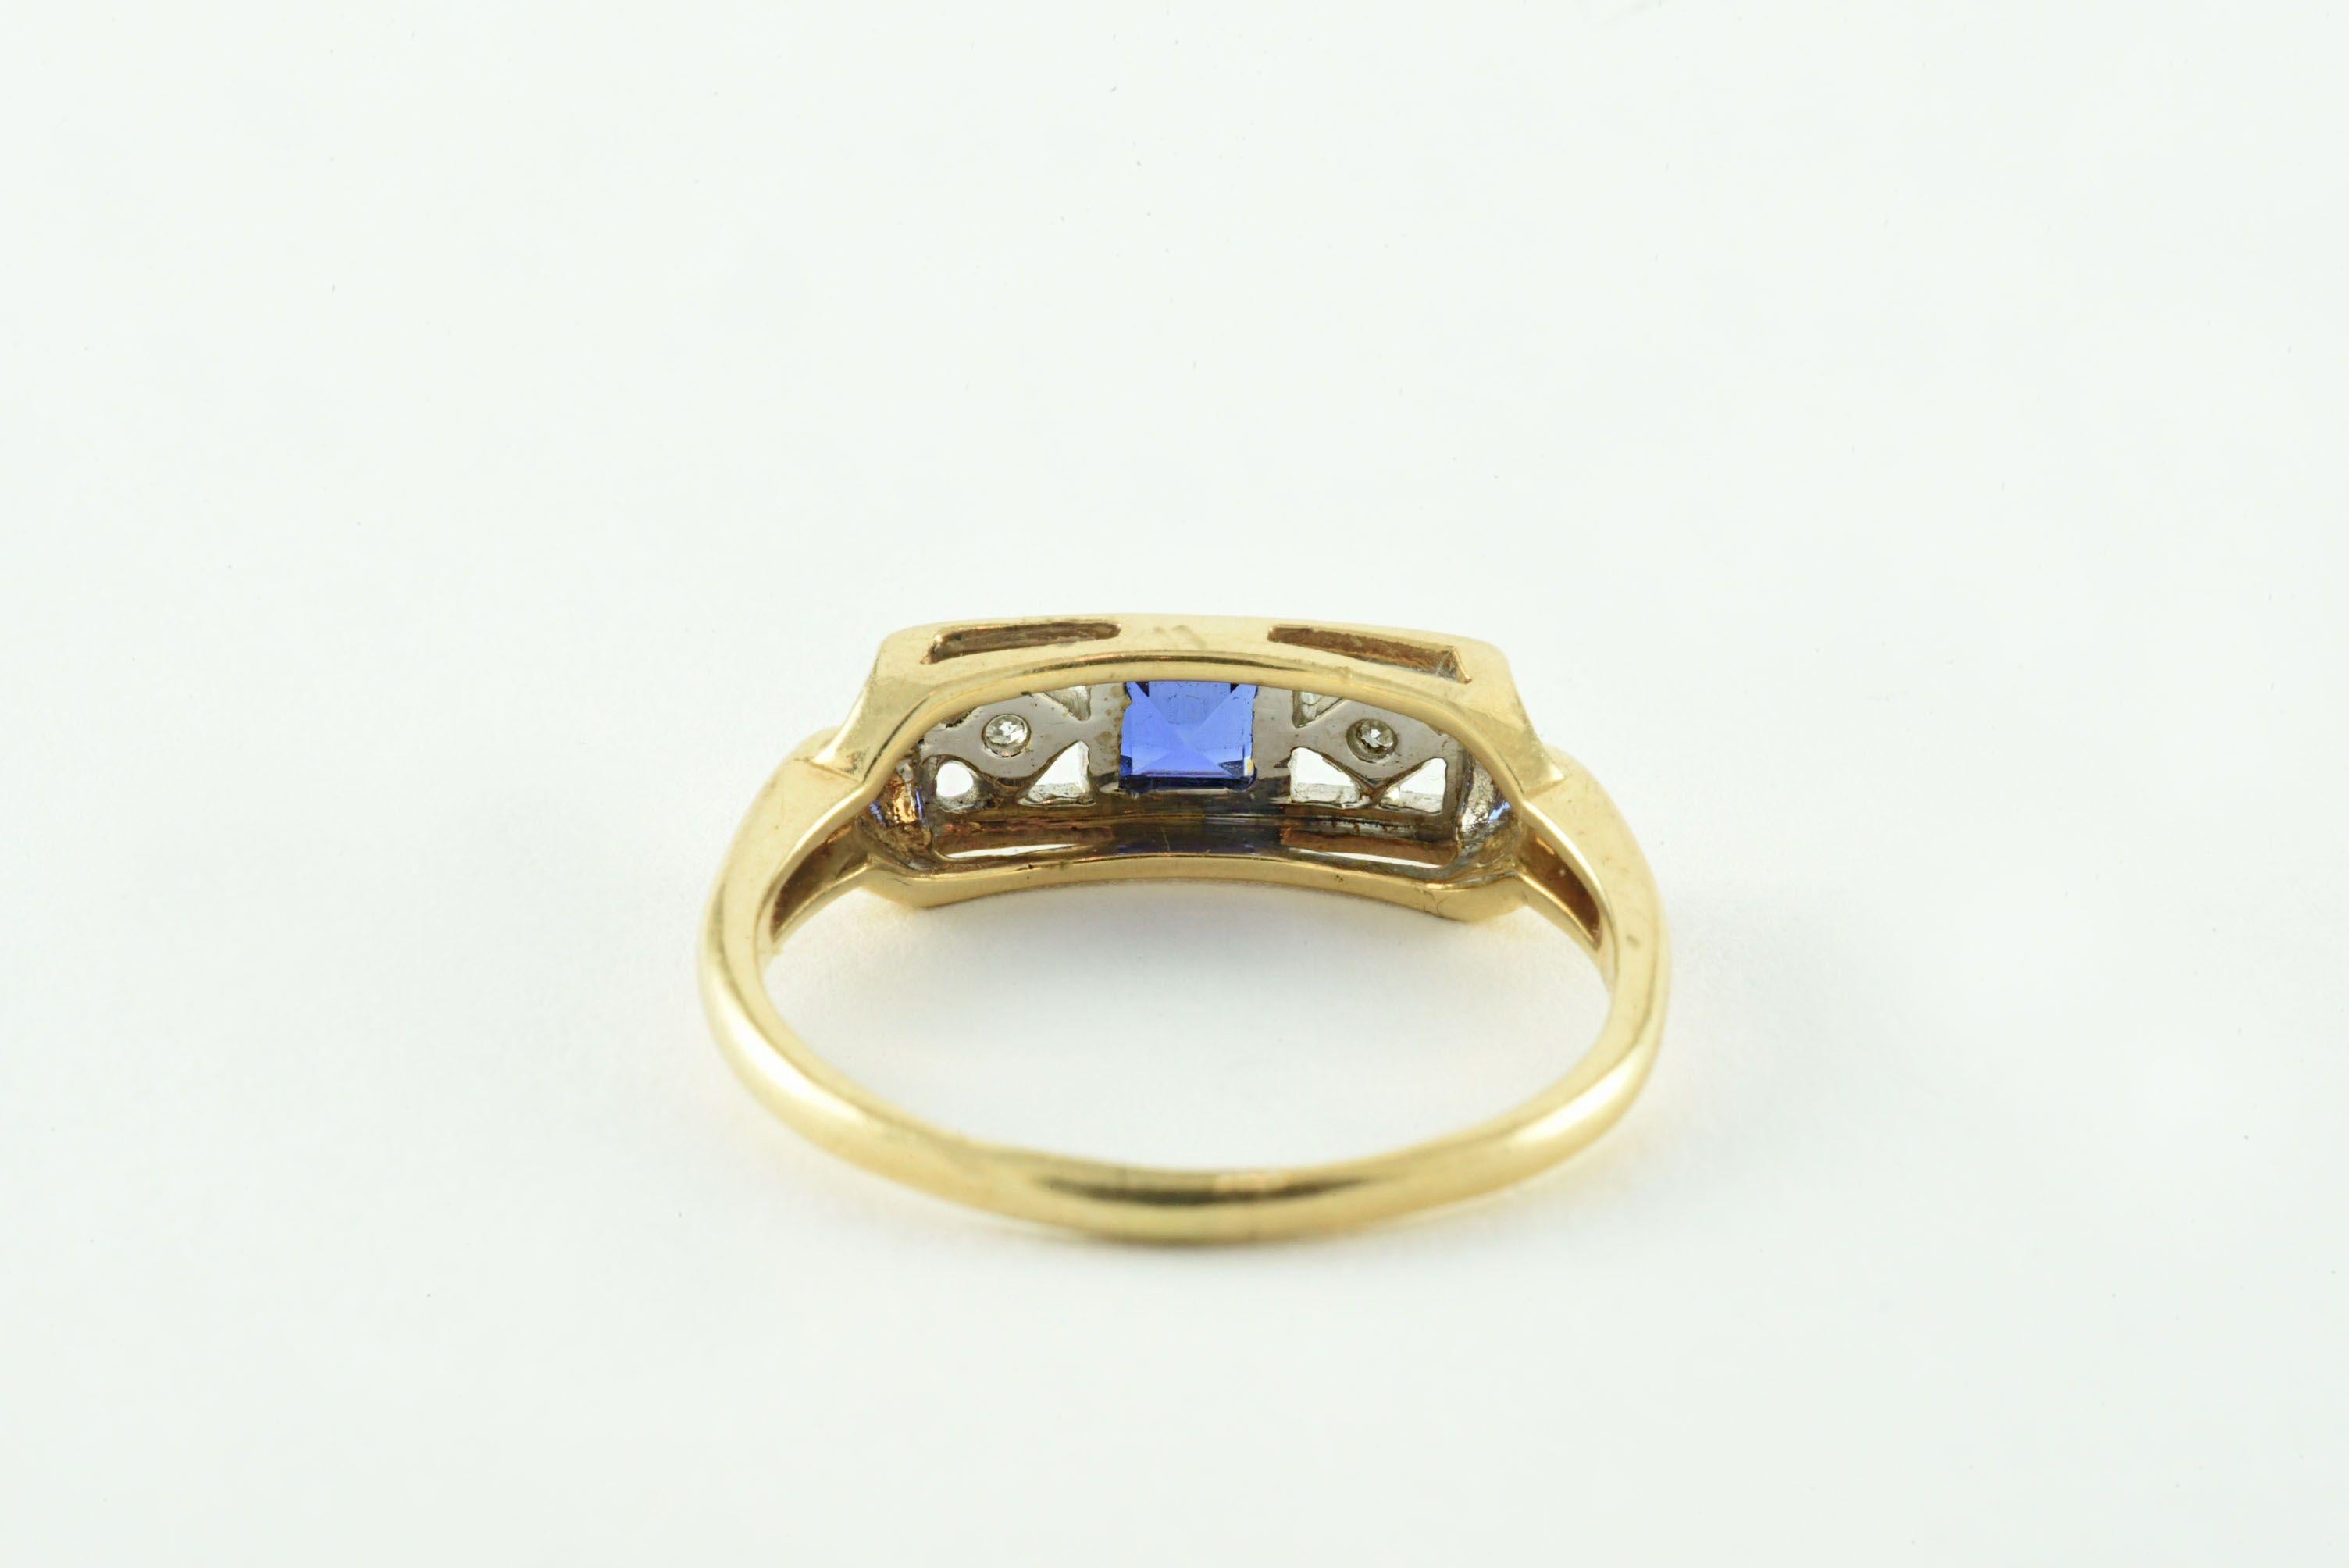 Crafted in the 1920s, this antique ring features a natural blue square-shaped sapphire accented east and west with two single cut diamonds totaling 0.02 carats in an openwork diamond design with delicate milgraining and framed in 14kt white gold